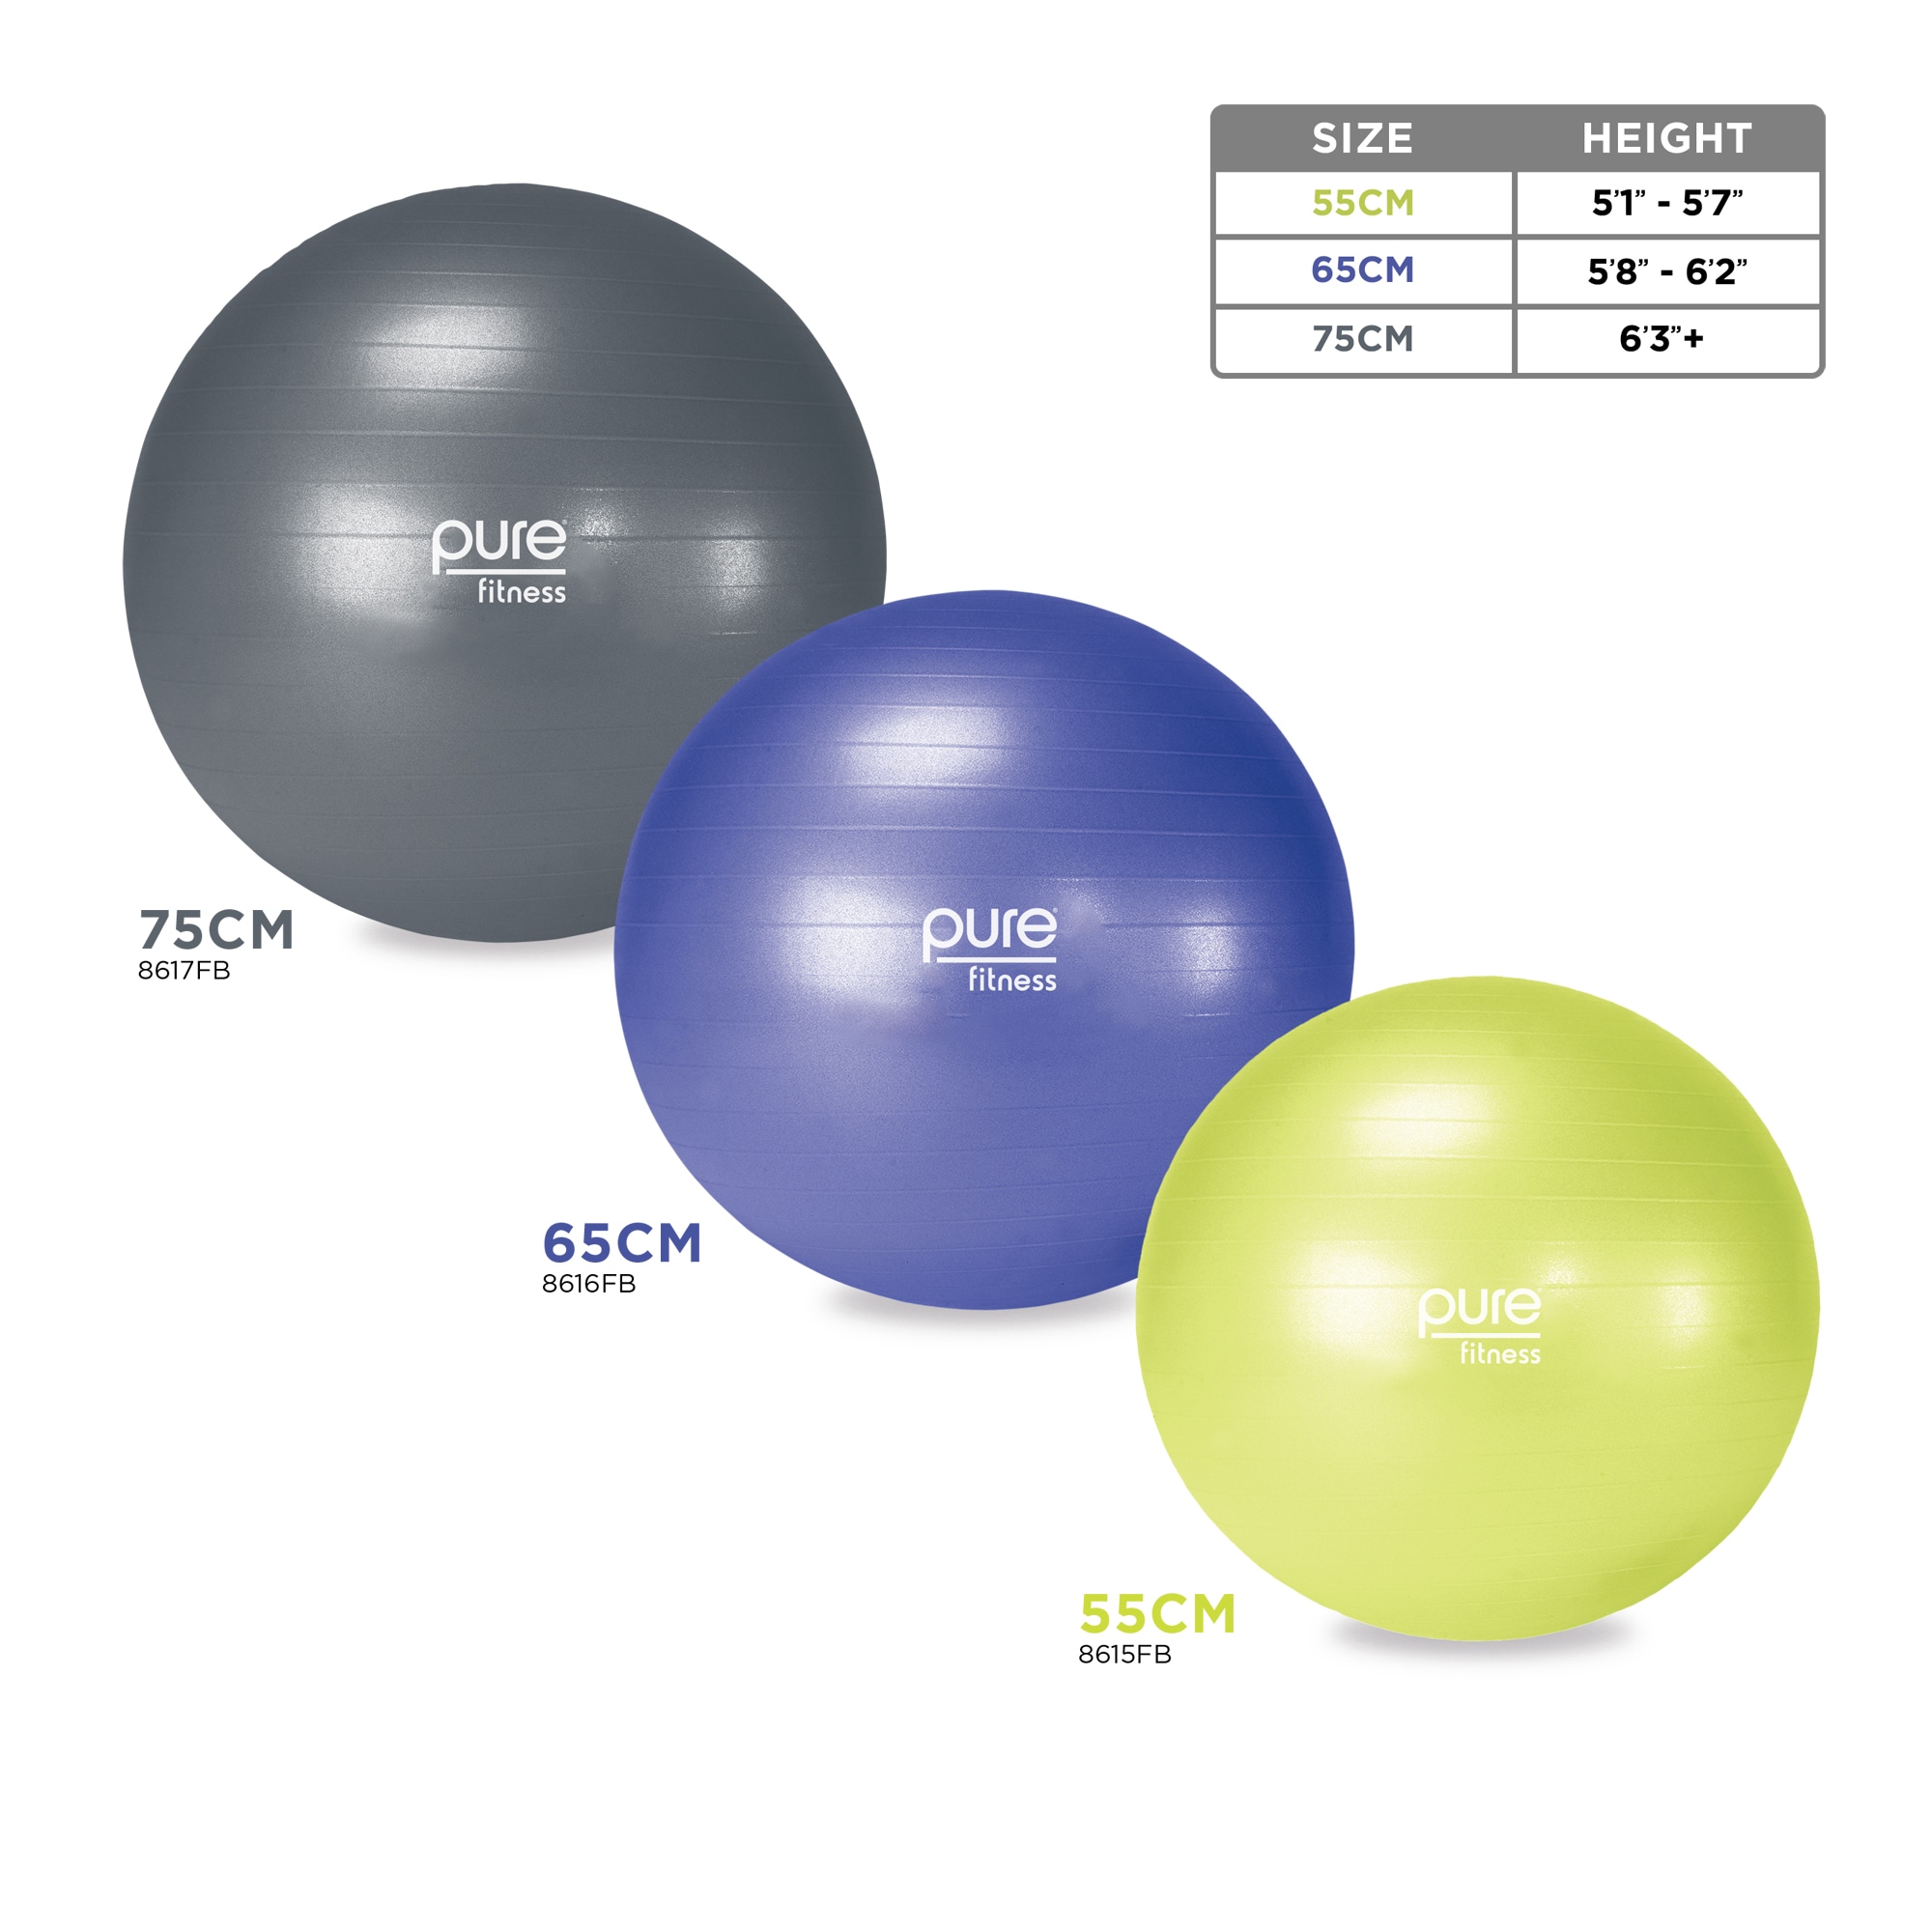 75Cm Yoga Ball, Exercise Ball For Fitness, Stability, Balance & Birthing,  Anti-Burst Professional Quality Design Balance Ball Pilates Core&Workout  Ball With Quick Pump - Home Gym Office Chair 